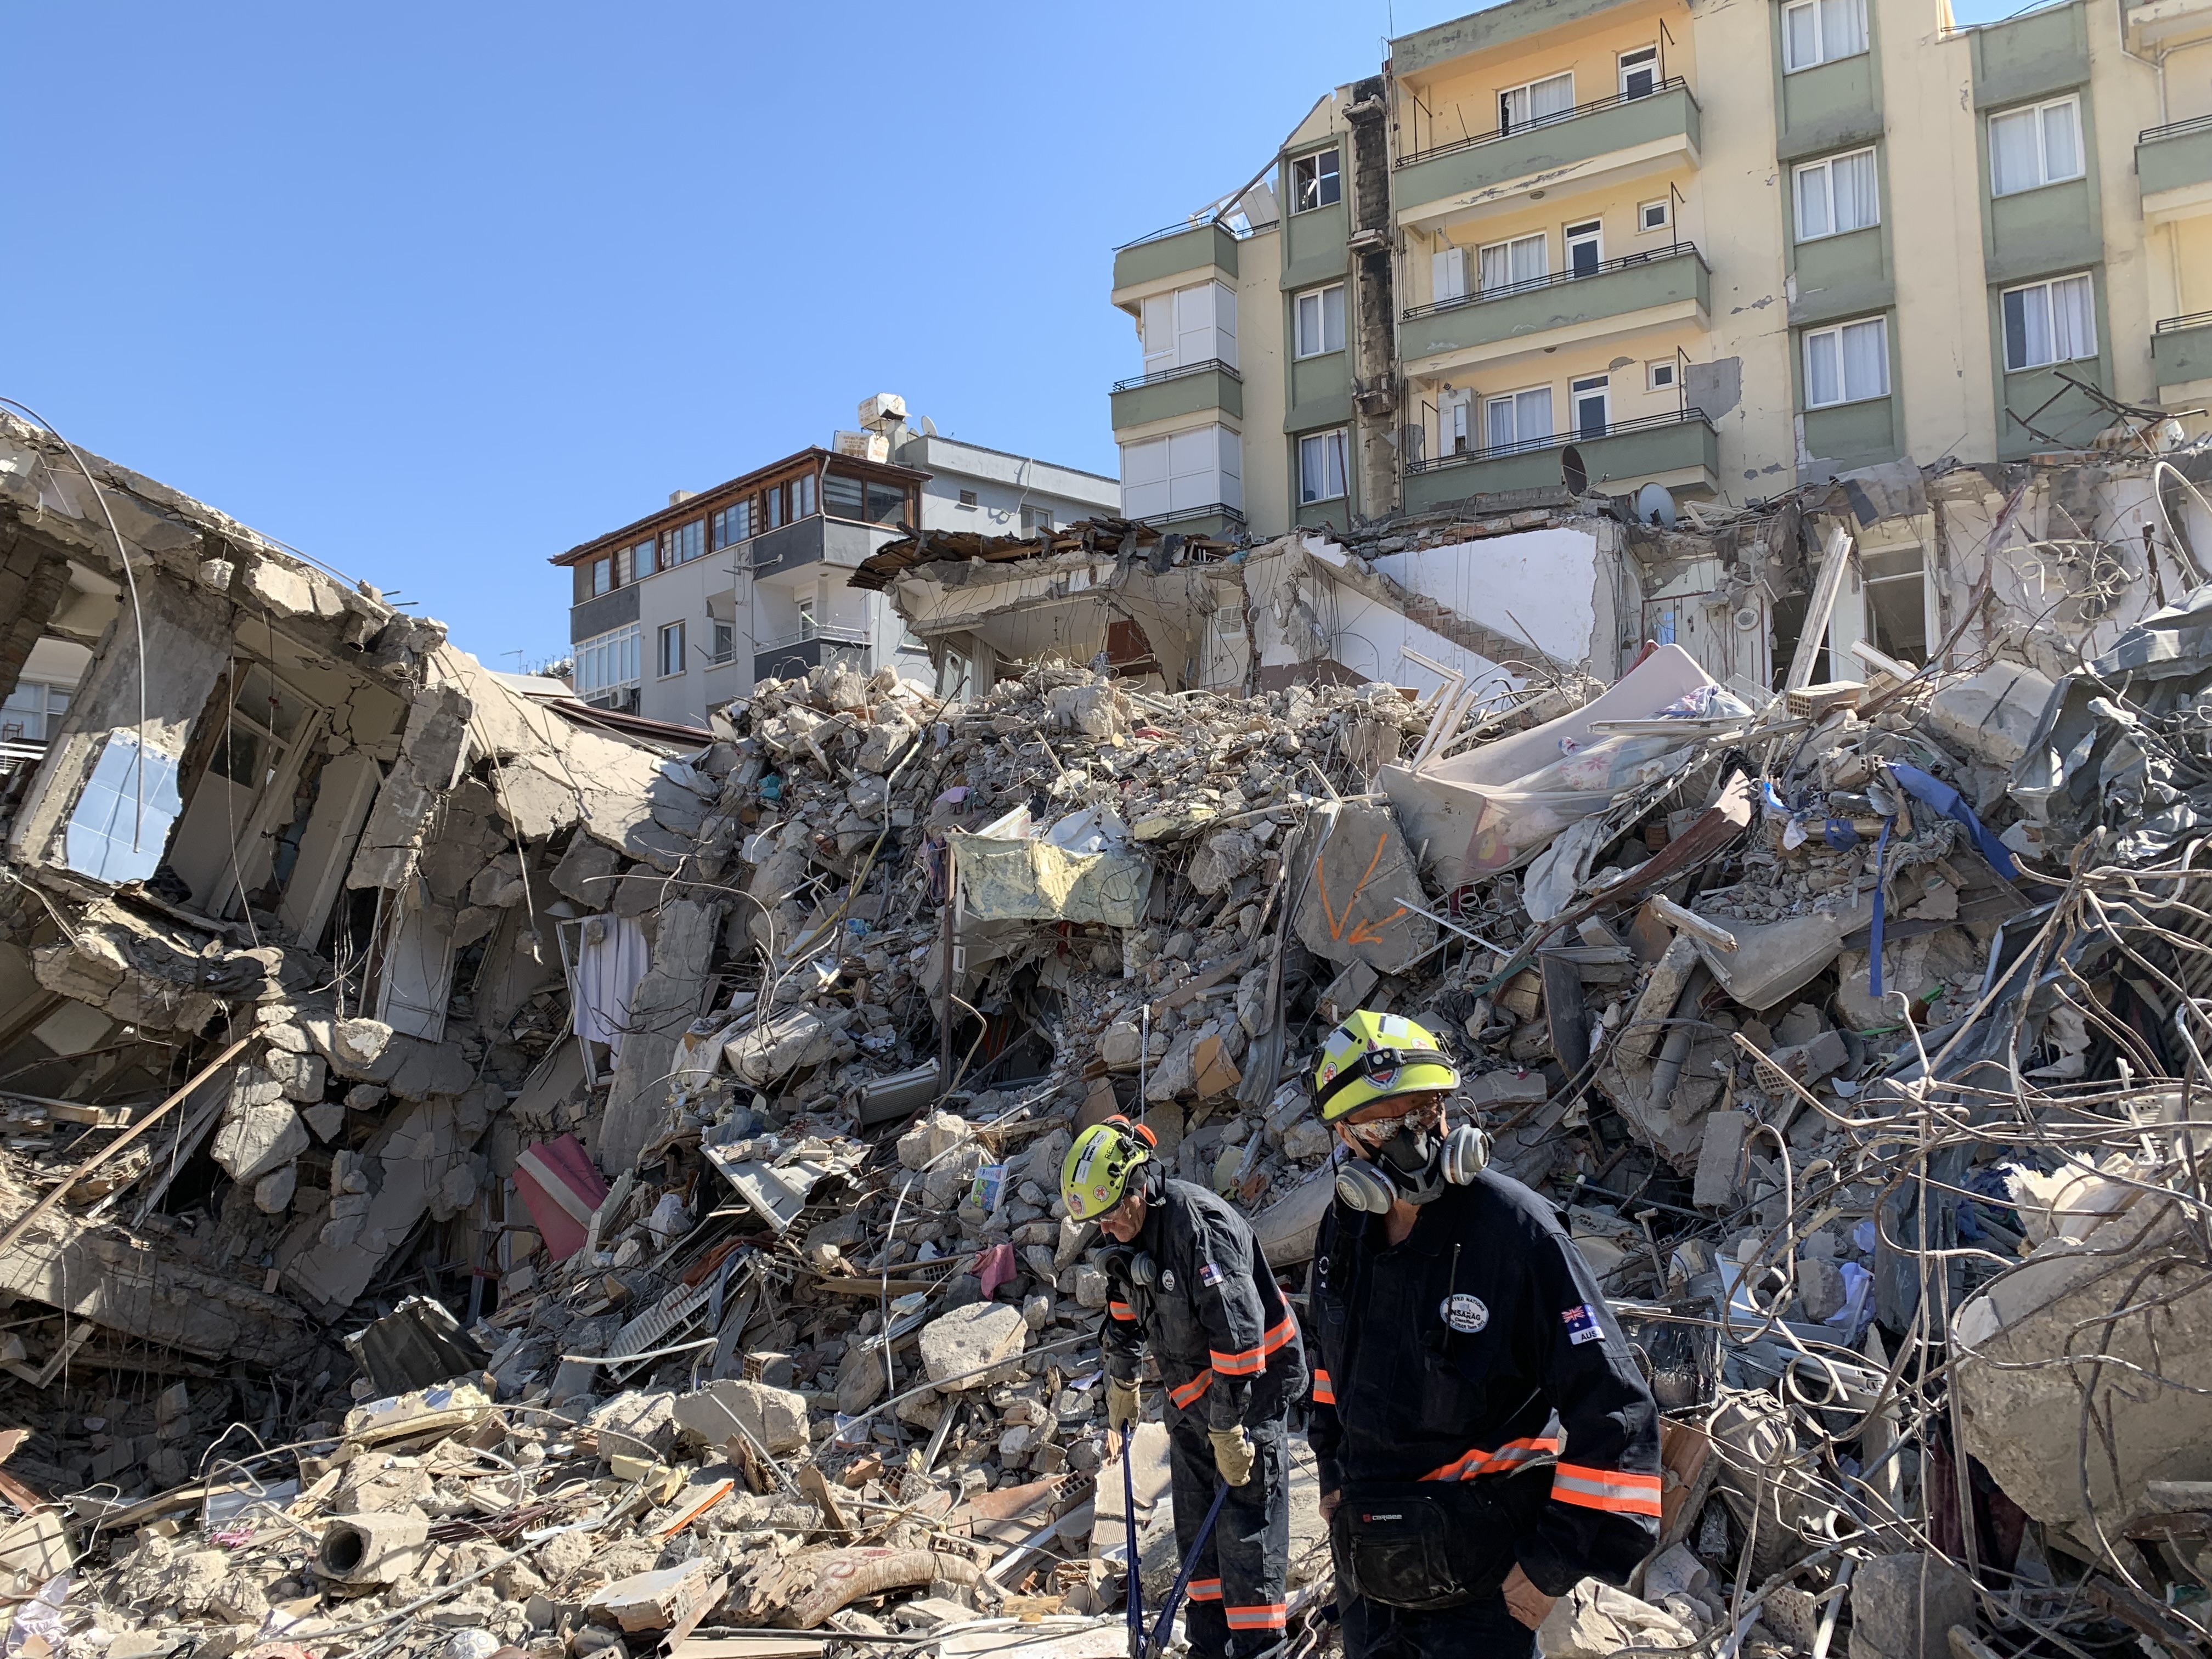 Türkiye earthquake: Supporting search and rescue efforts 